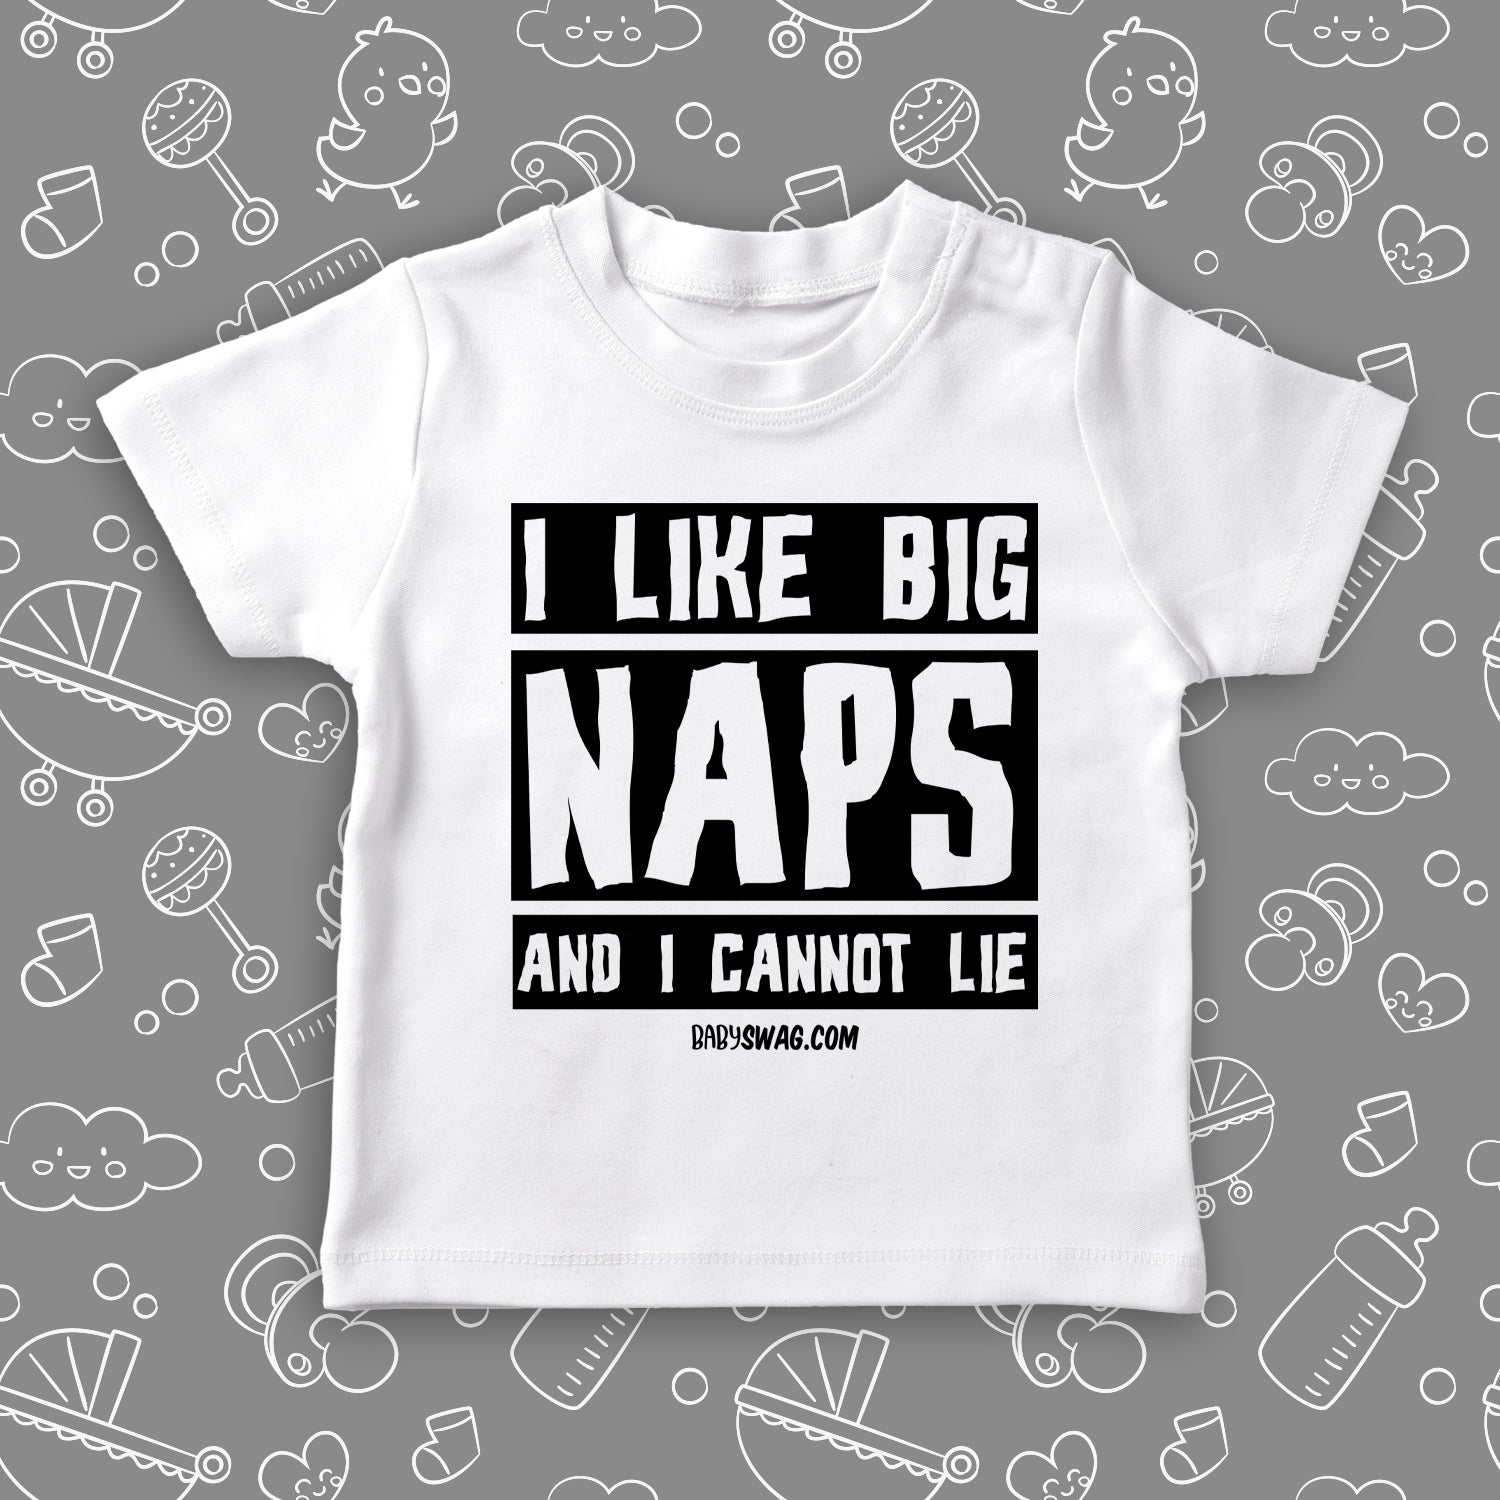 Cool toddler shirts with saying "I Like Big Naps And I Cannot Lie" in white. 